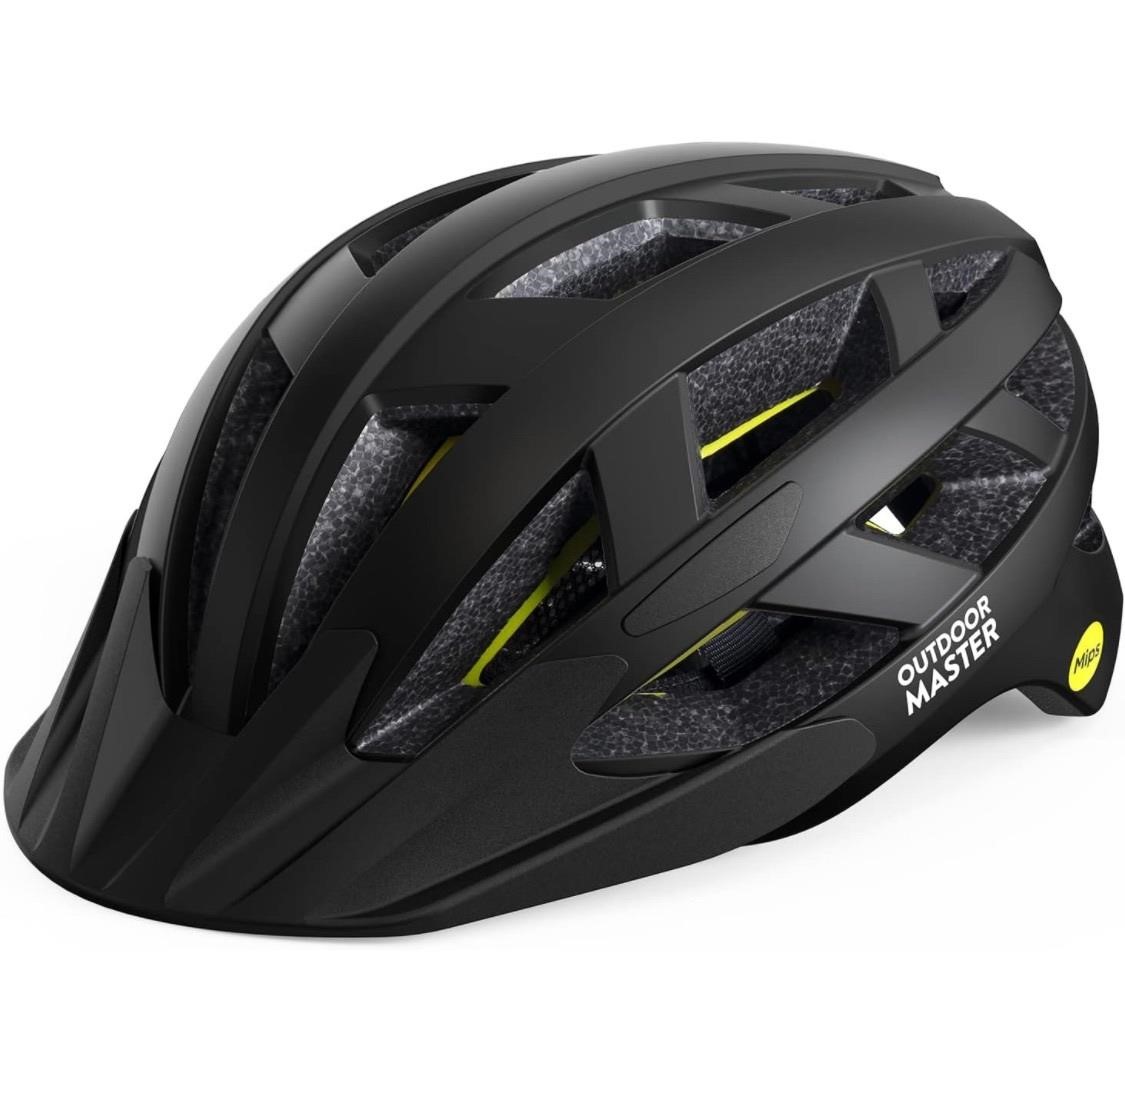 $46 OutdoorMaster Gem Recreational MIPS Cycling